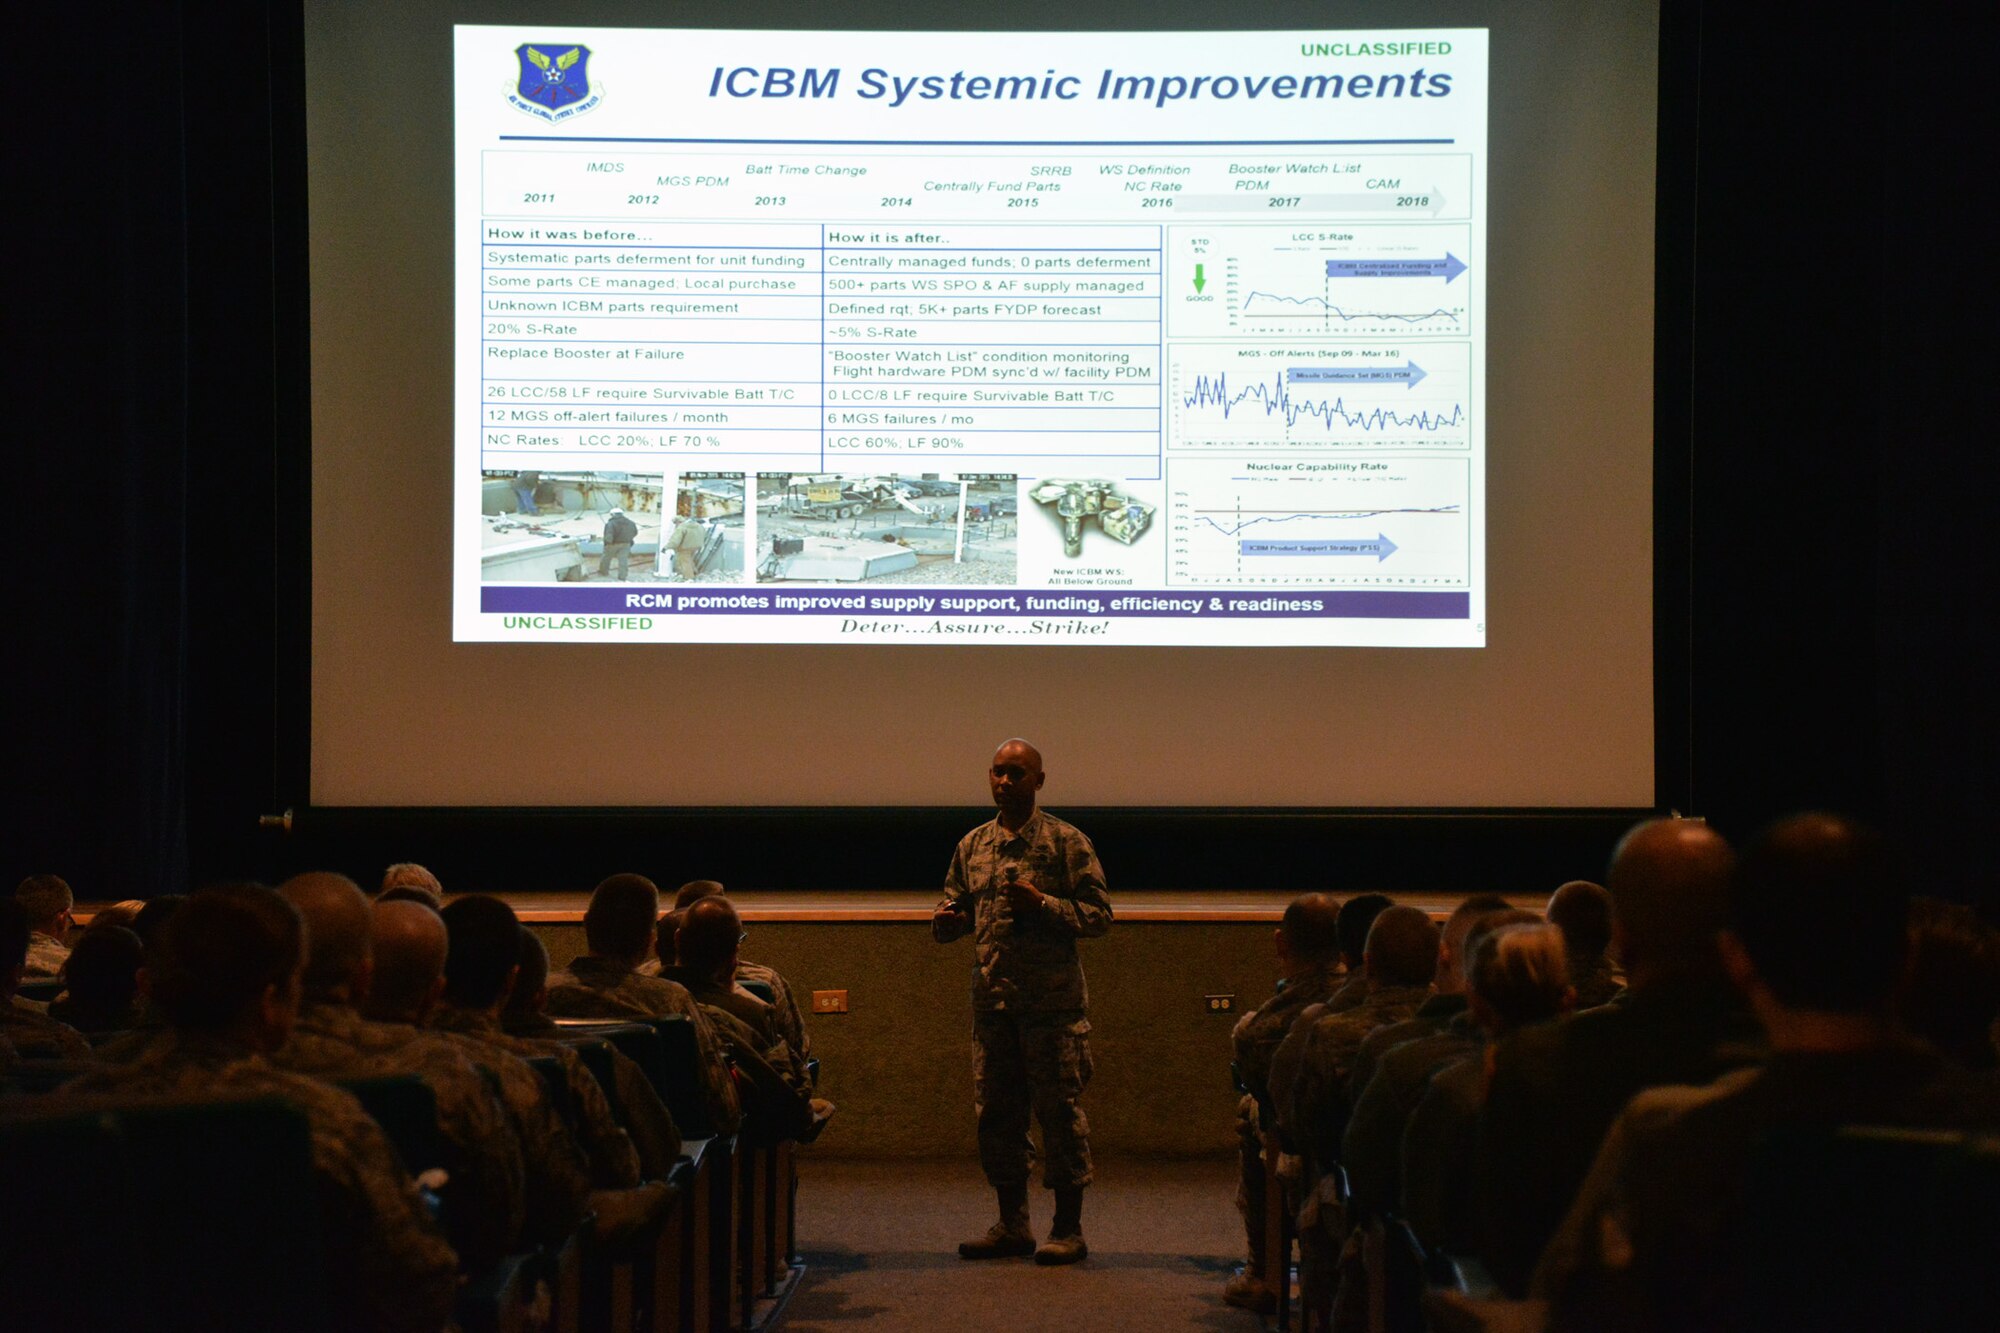 Col. Eric Moore, chief of intercontinental ballistic missile maintenance division, briefs Airmen during the ICBM sustainment roadshow Feb. 1, 2017, at Malmstrom Air Force Base, Mont. The roadshow communicated Minuteman III sustainment improvement actions that have been taken or that are in progress. The roadshow also covered how and when those initiatives will impact missile operators, maintainers and security forces in the missile field. (U.S. Air Force photo/Airman 1st Class Daniel Brosam)